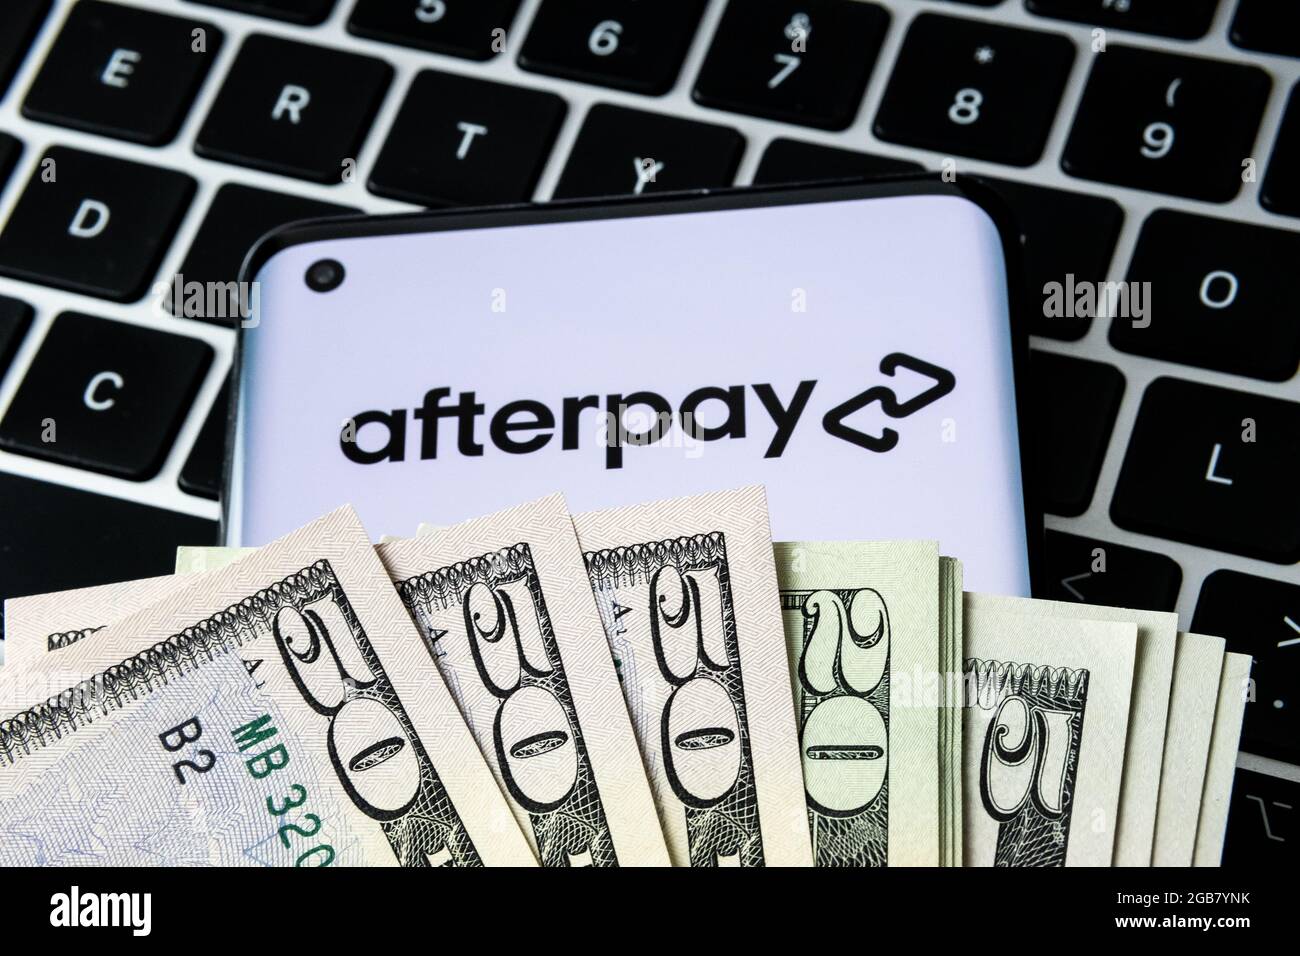 Afterpay company logo seen on smartphone covered with dollars and placed on keyboard. Buy now pay later company. Stafford, United Kingdom, August 2, 2 Stock Photo